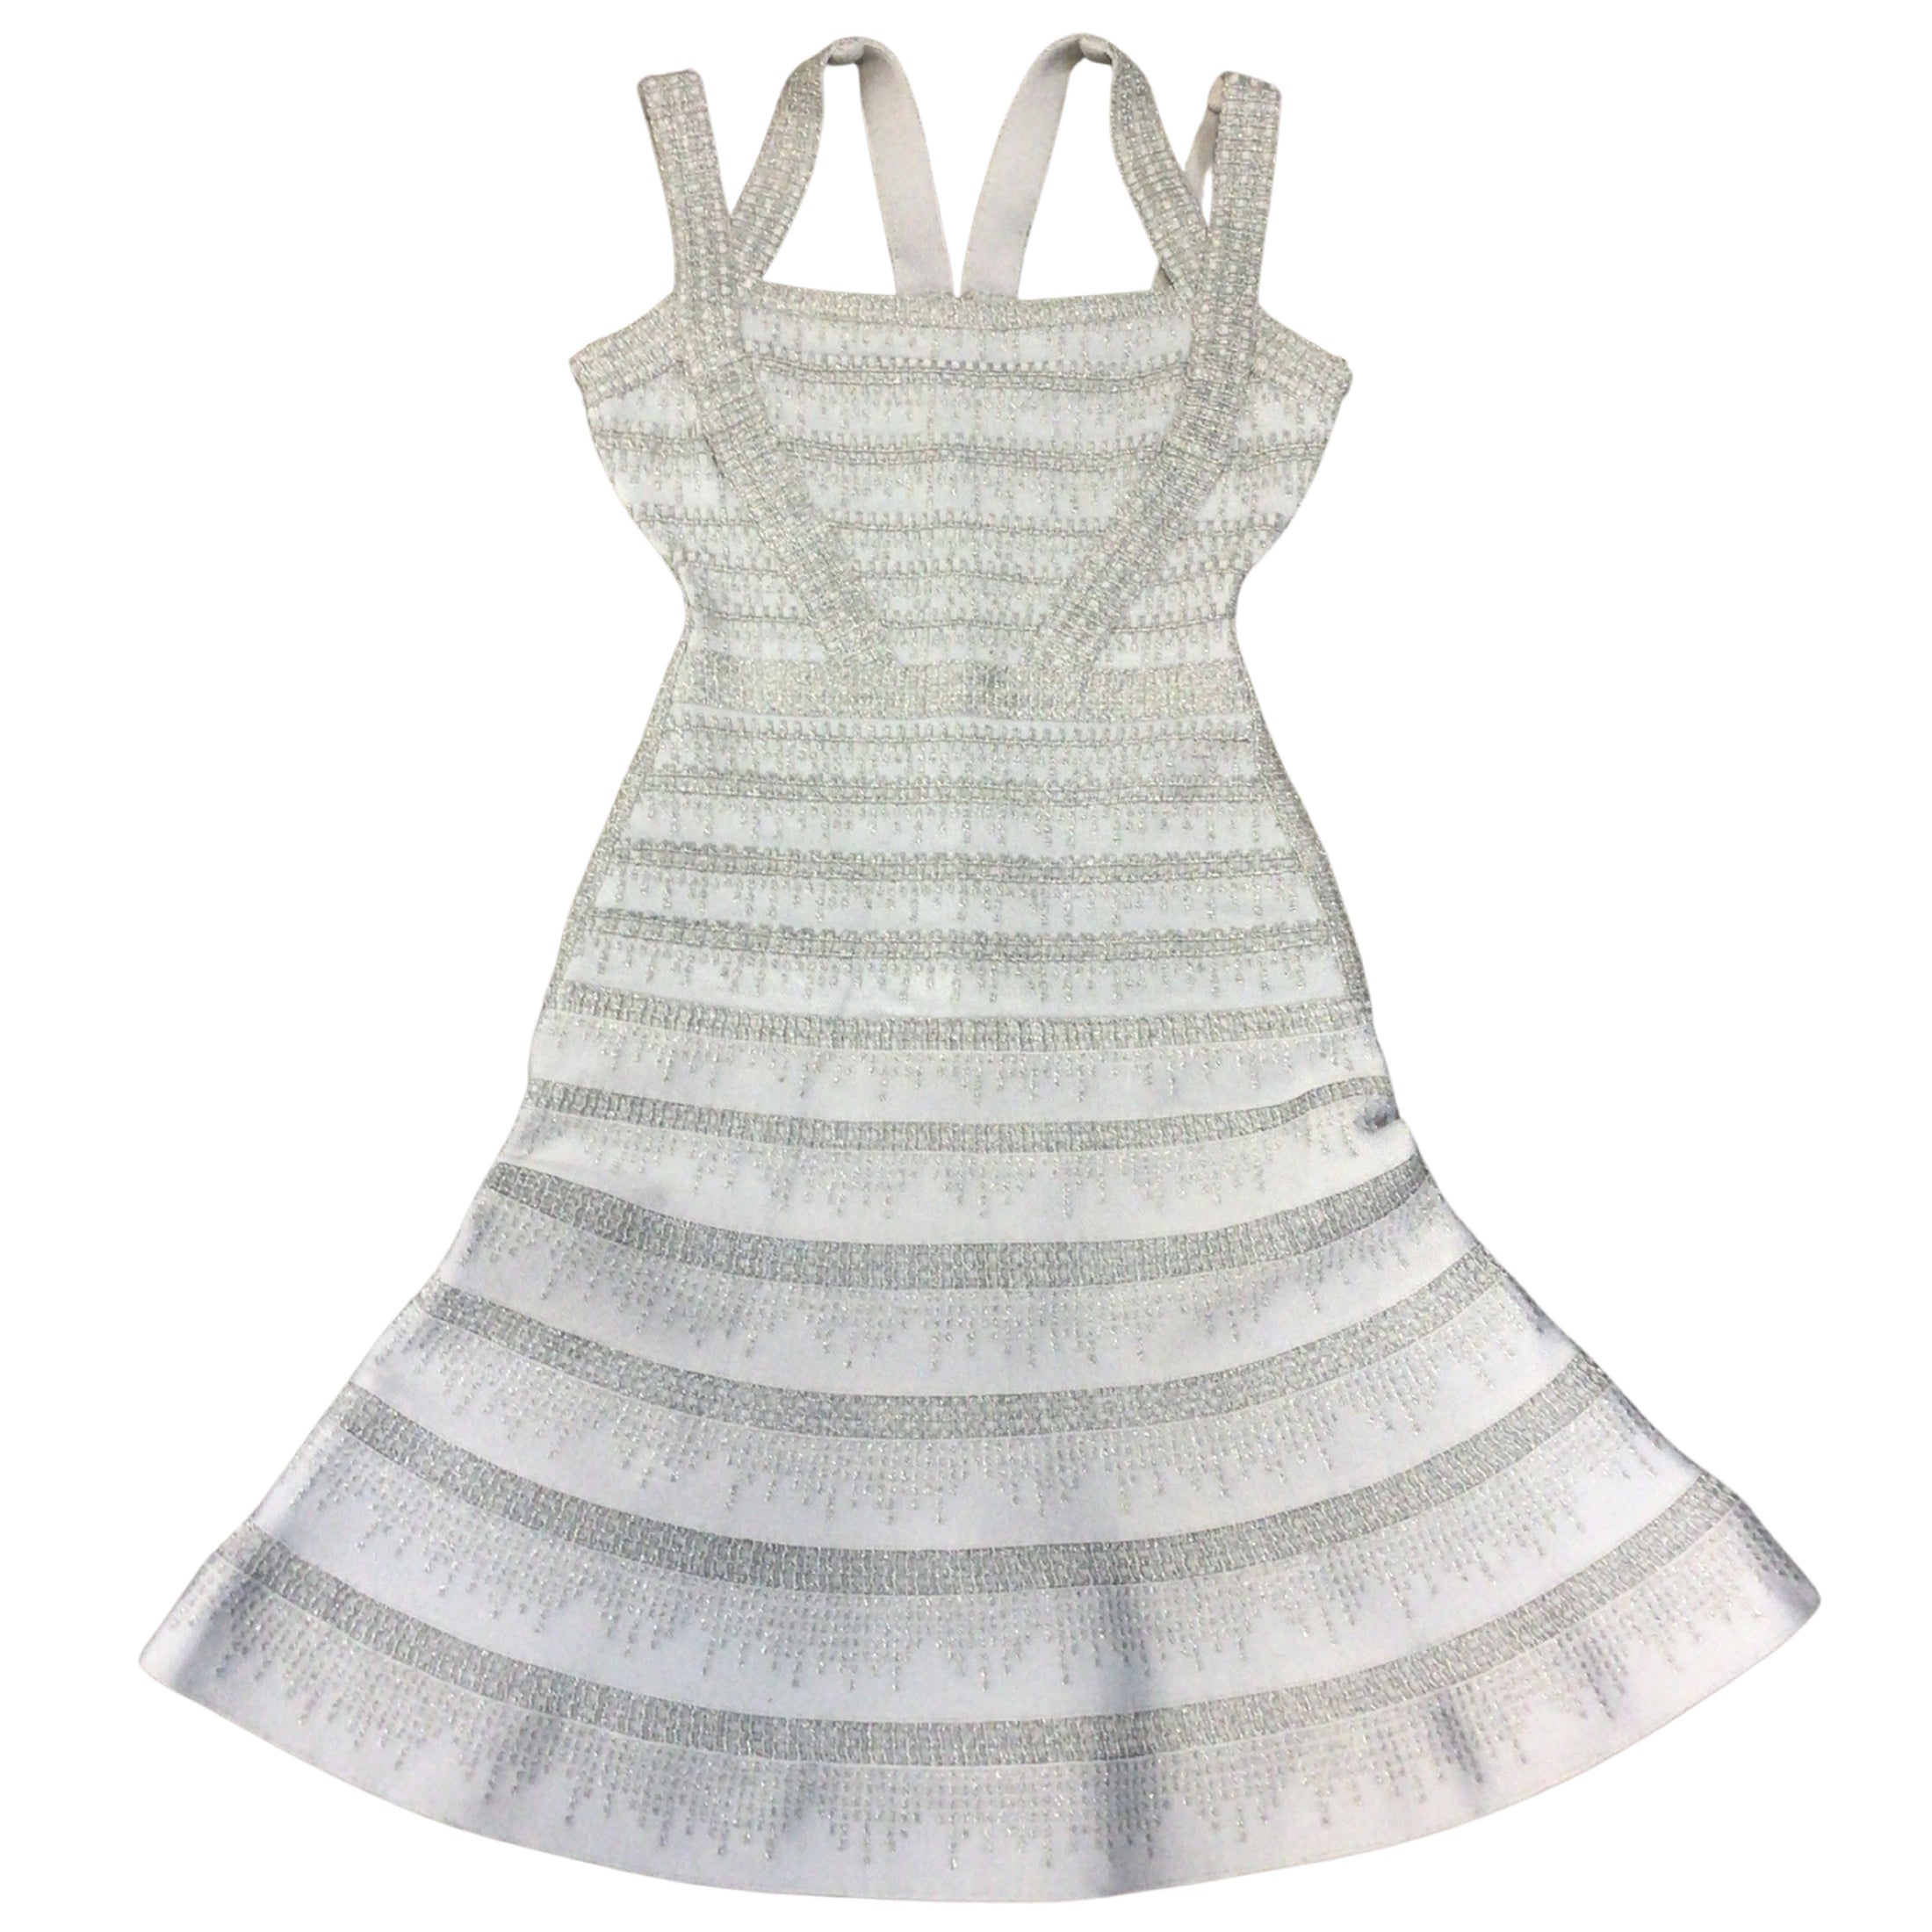 Herve Leger Carole Light Blue Metallic Fitted and Flared Dress